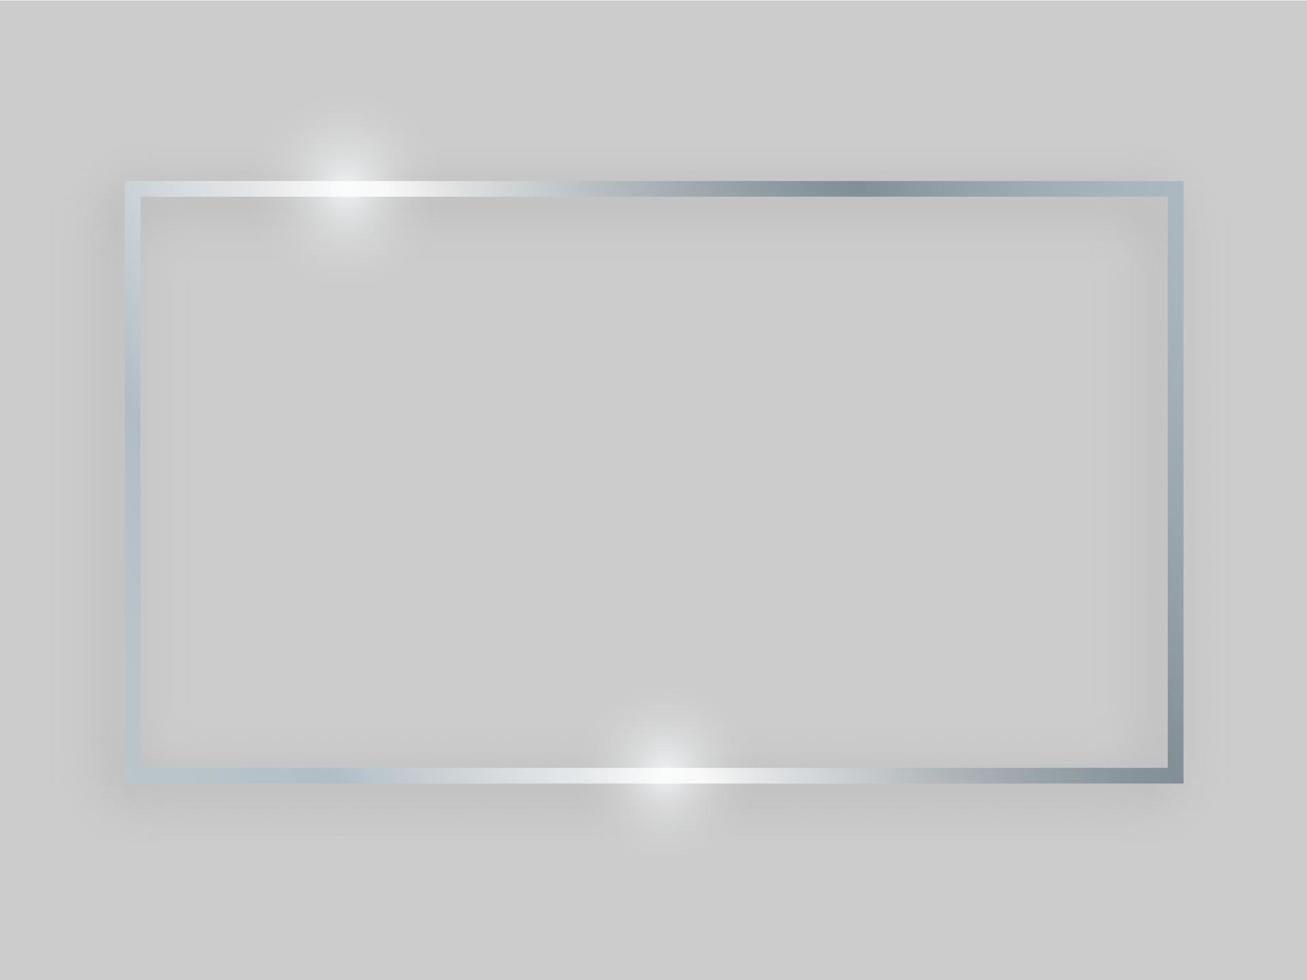 Shiny frame with glowing effects. Silver rectangular frame with shadow on grey background. Vector illustration